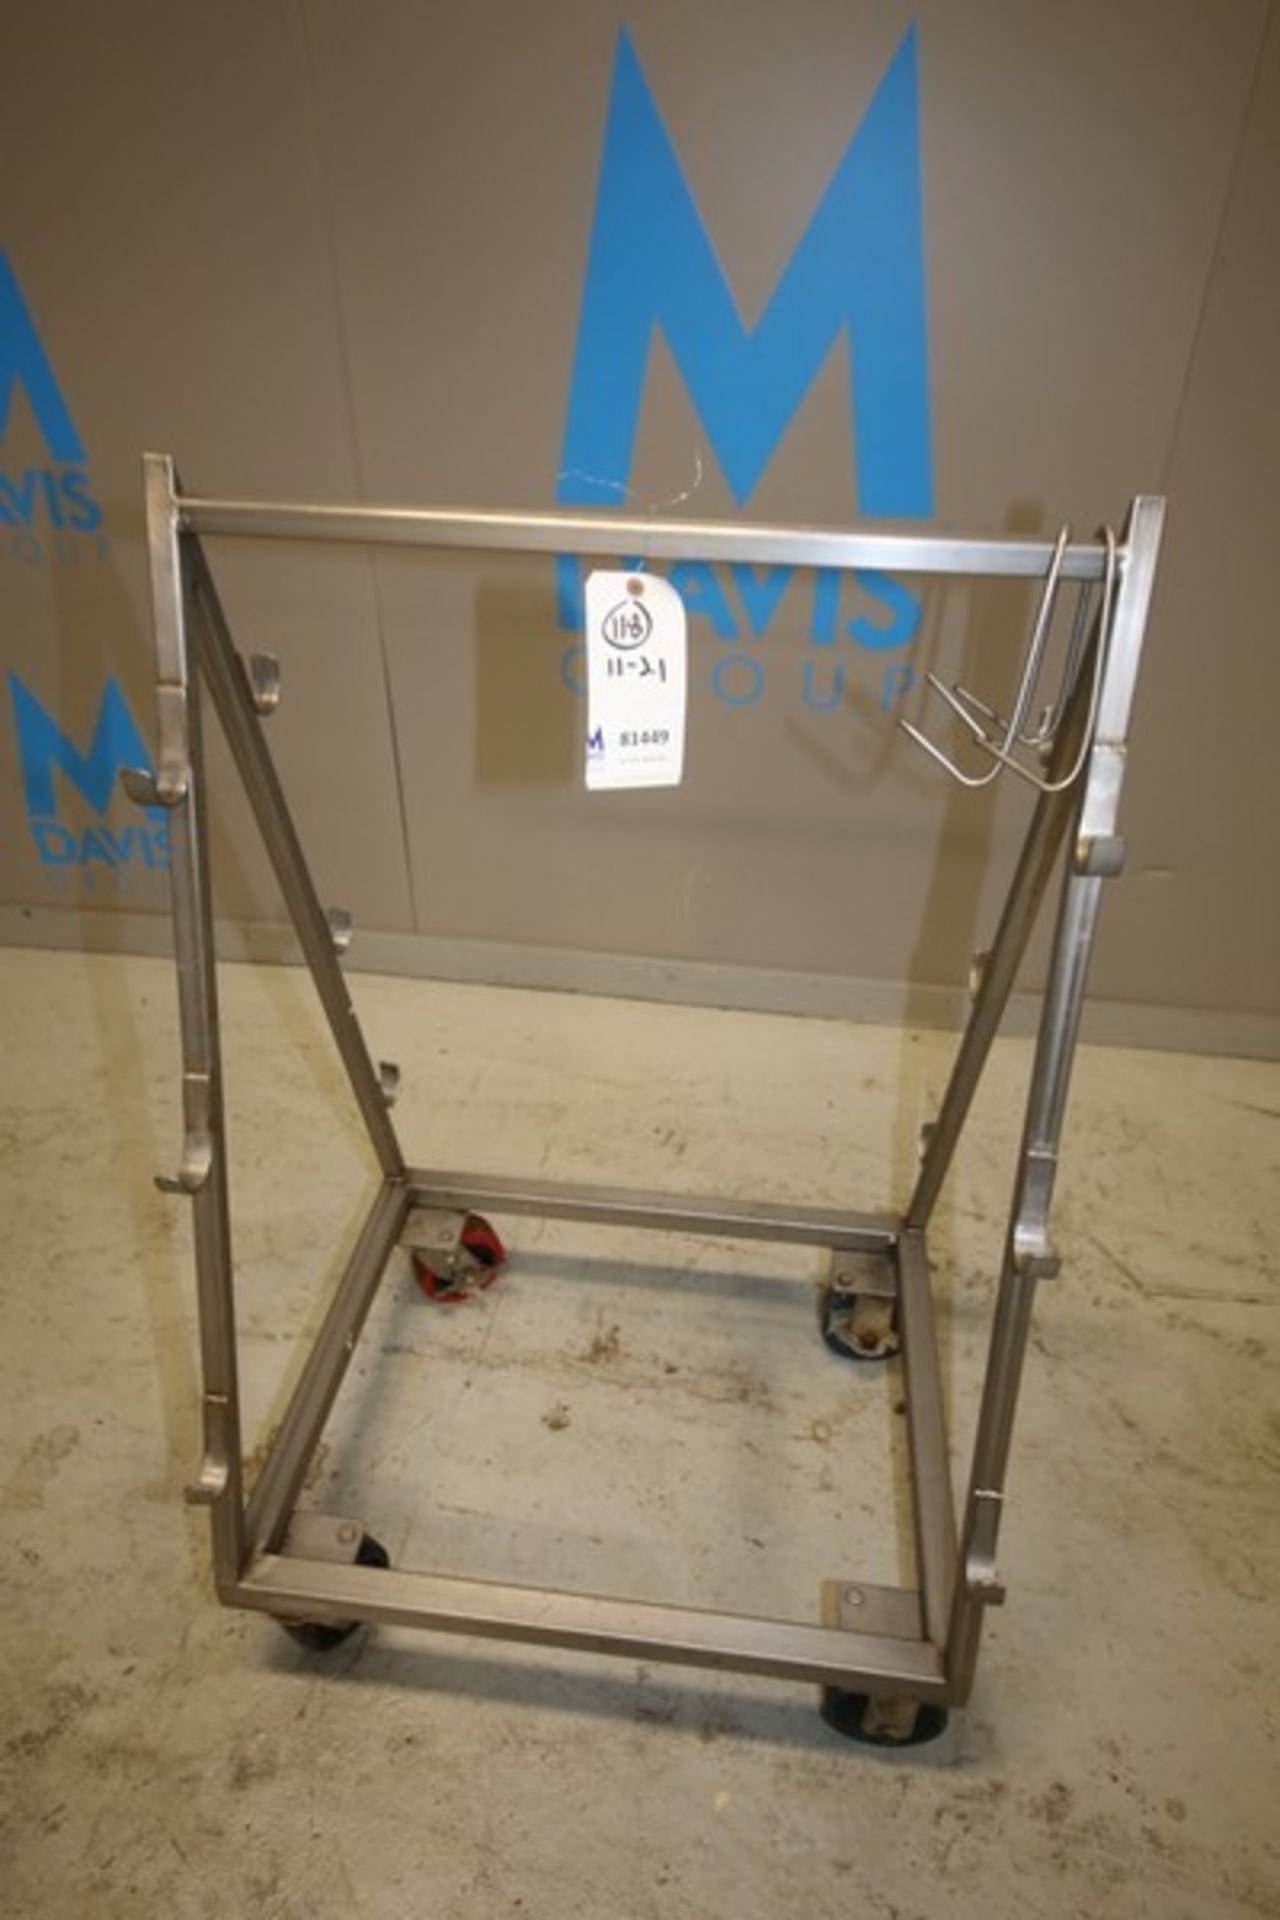 30" L x 24" W x 48" H S/S Portable Rack(INV#81449)(Located @ the MDG Auction Showroom in Pgh., PA)(